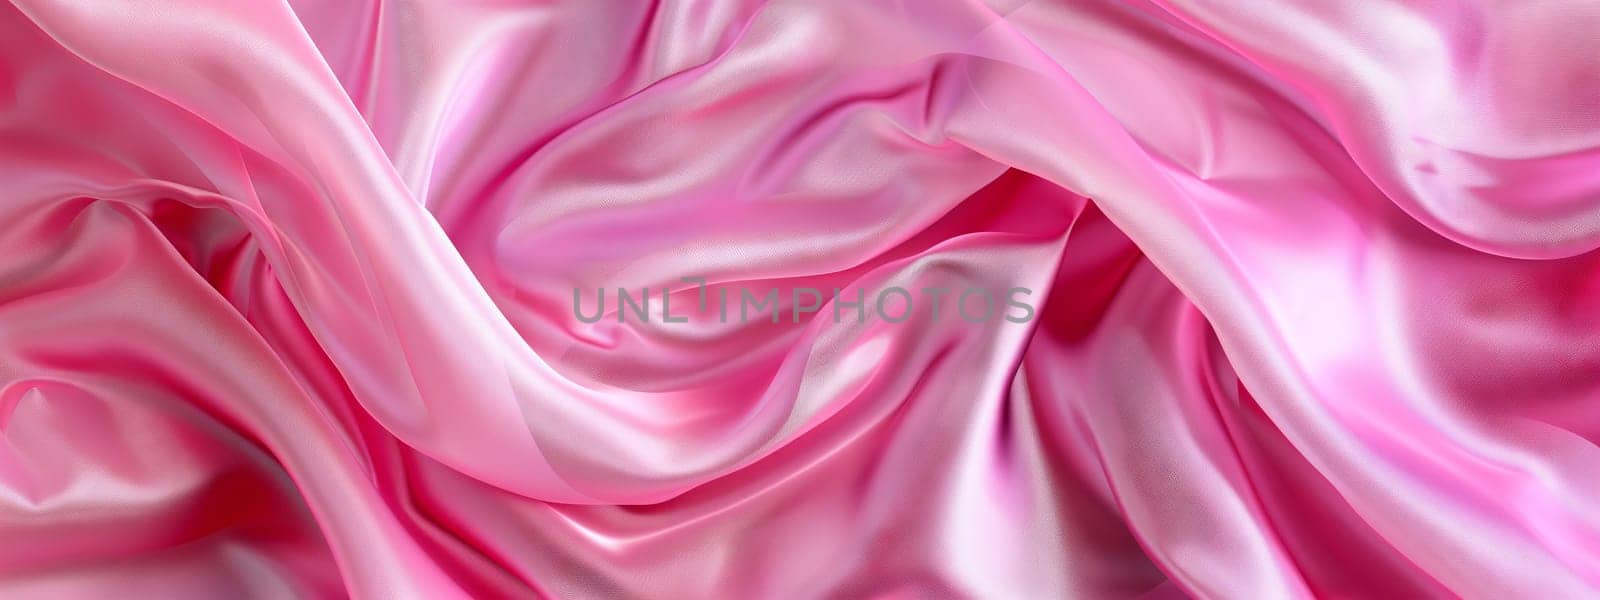 A detailed closeup of a vibrant pink satin fabric resembling delicate petals, showcasing a beautiful pattern in shades of magenta and violet